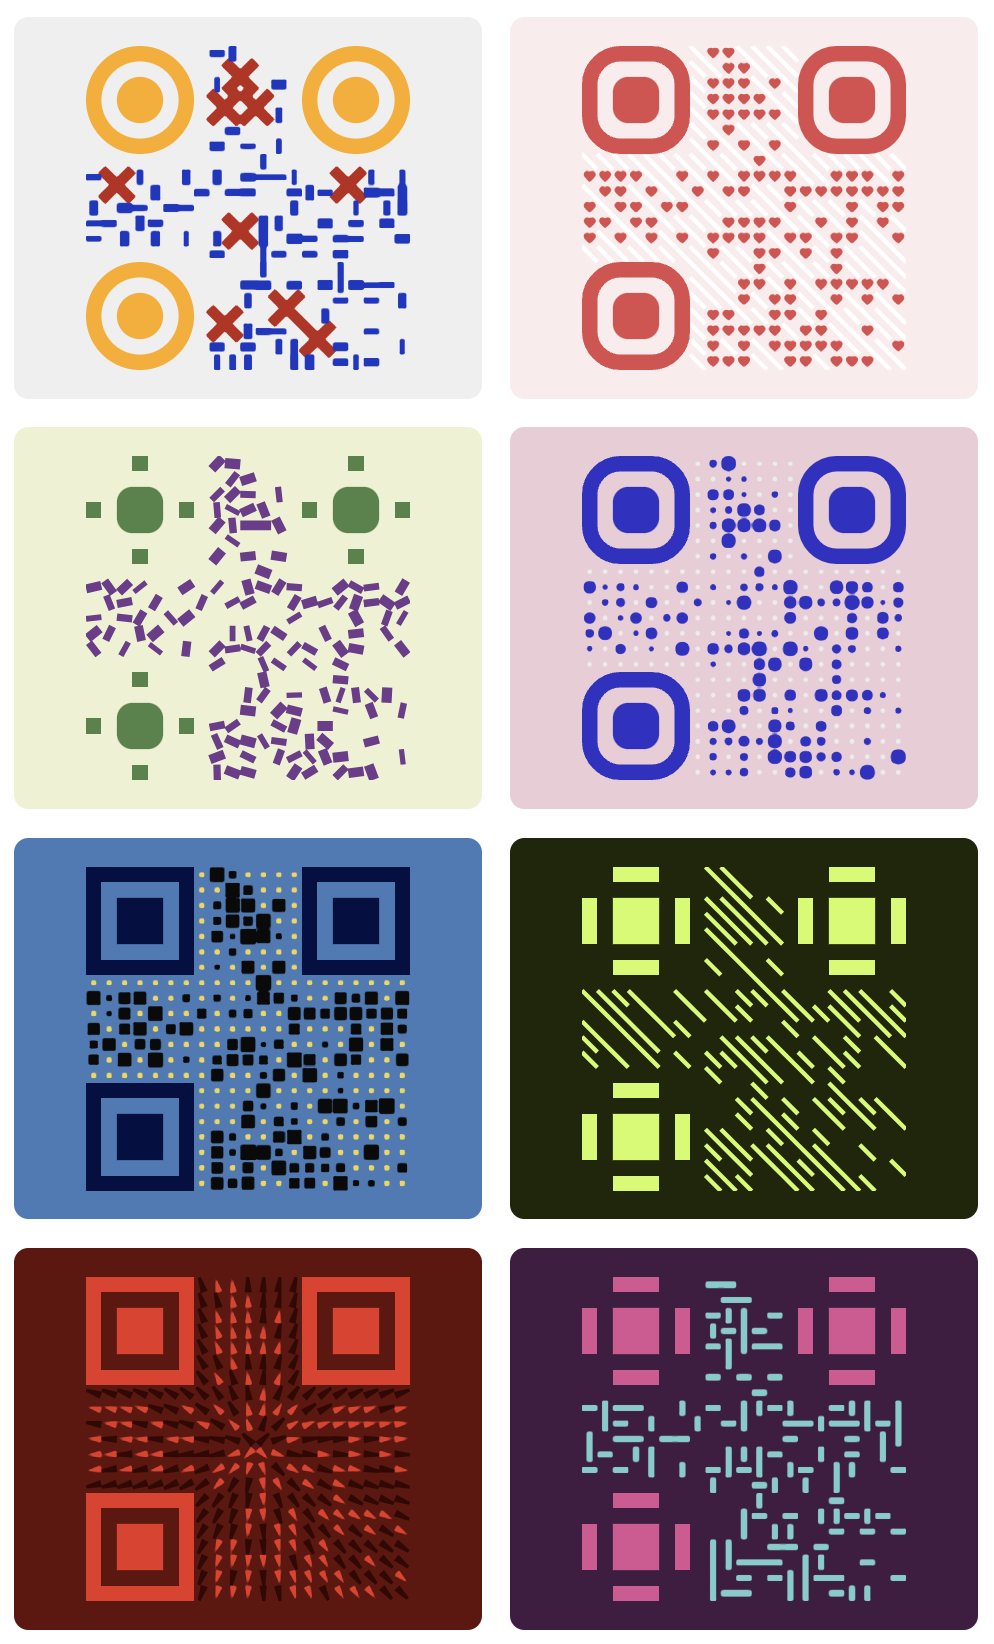 The unique QR code templates offered by QR Cool